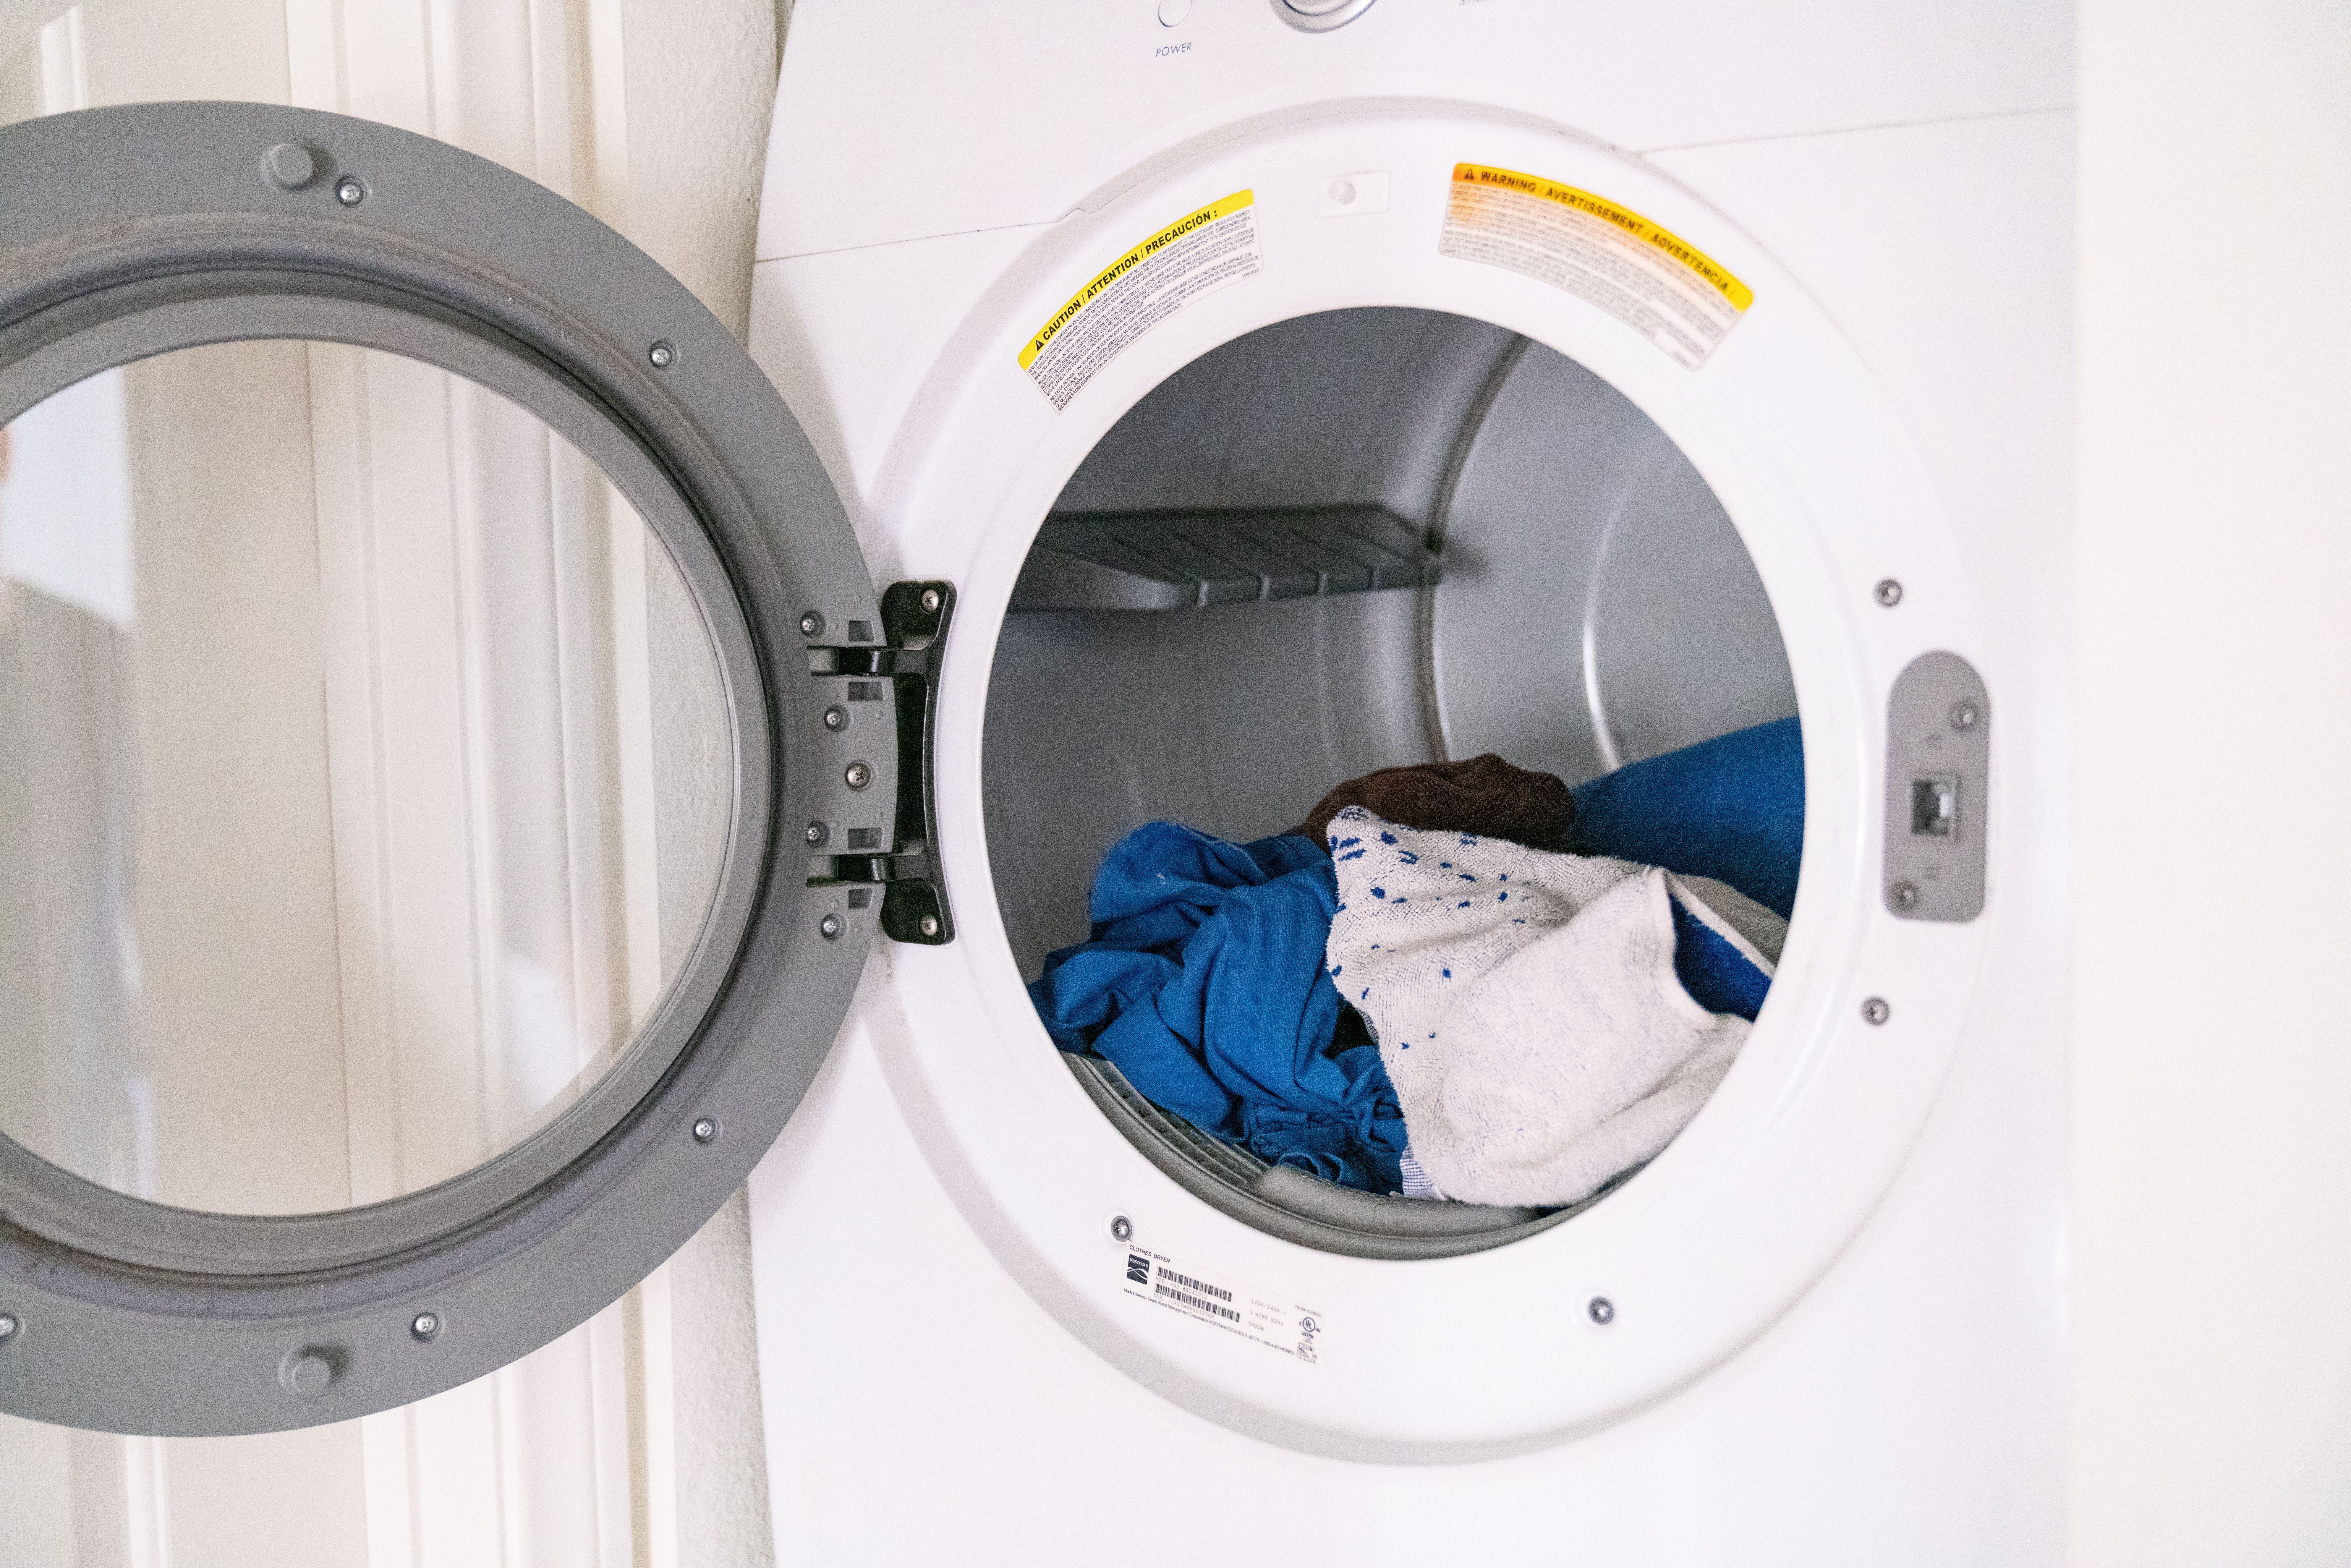 How to Fix Whirlpool Dryer Belt Issues: 7 Must-Know Tensioner Tips